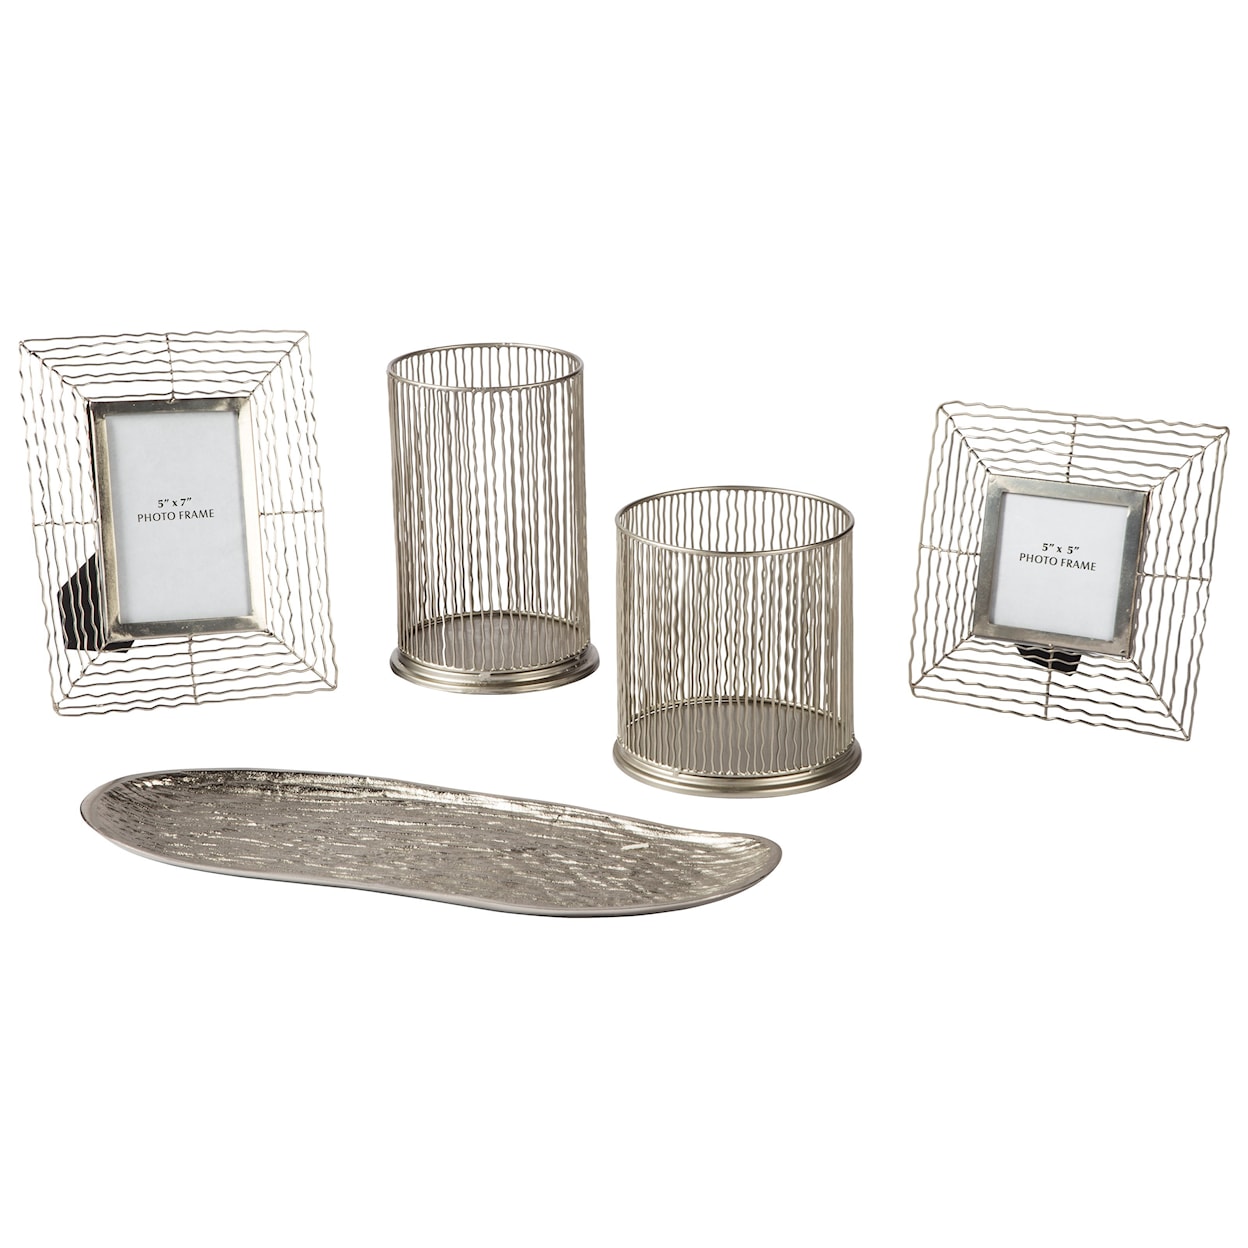 Benchcraft Accents Dympna Silver Finish Accessory Set